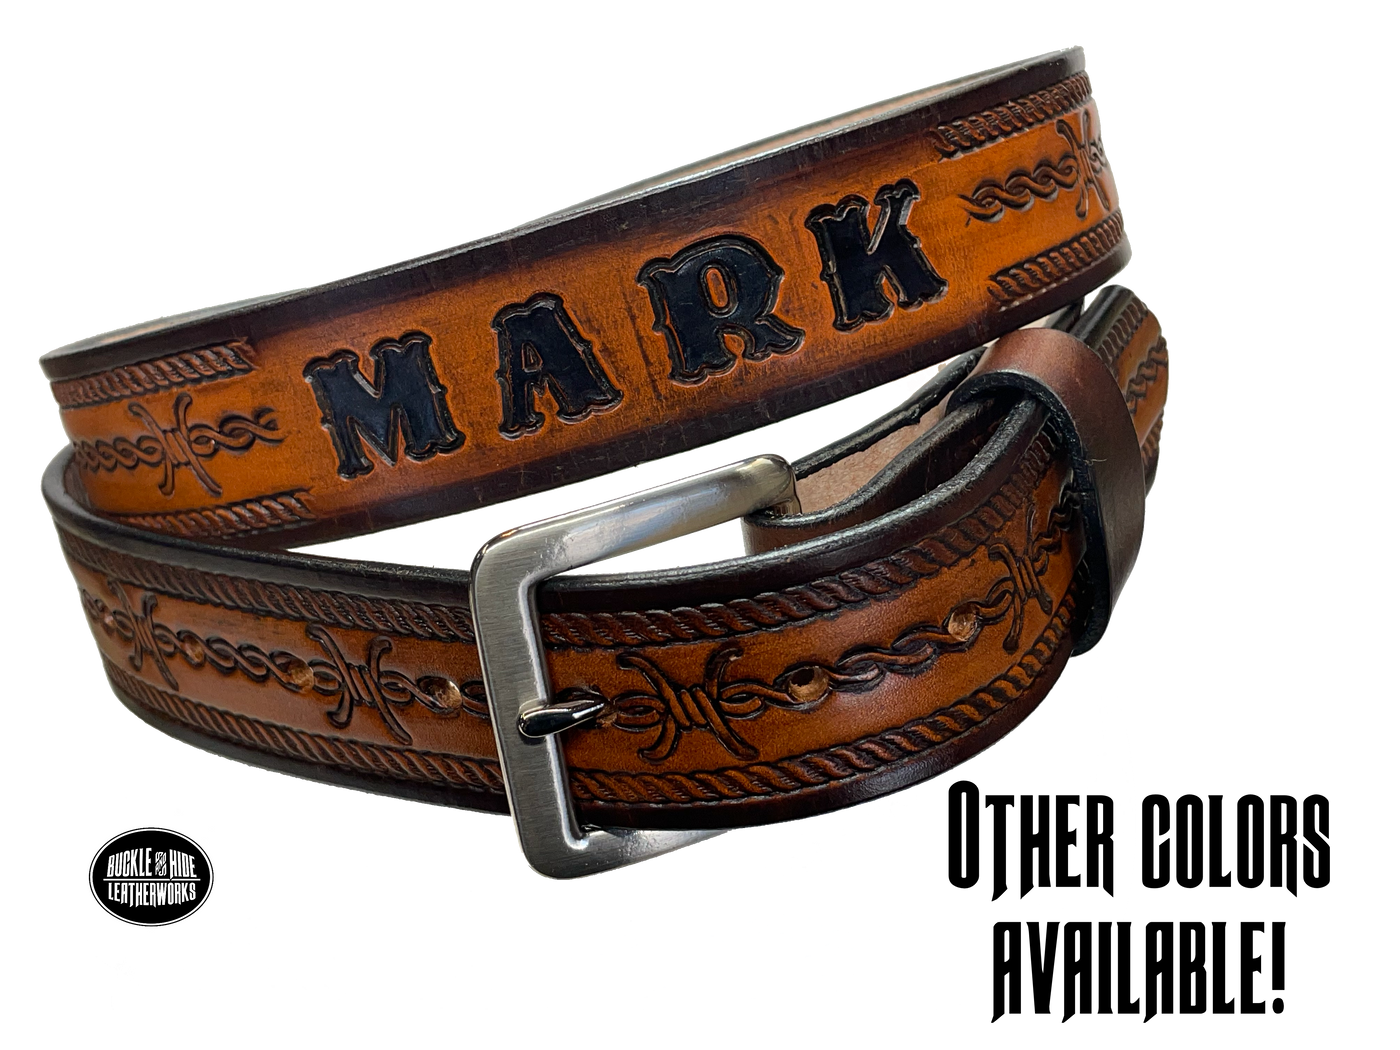 Barb Wire a western-inspired twist to any look. Made from premium veg-tan cowhide and featuring a barb wire icon design, the "Riding Fence" Name Leather Belt is the perfect way to add a touch of rustic  to your wardrobe. Hailing from our Smyrna, TN shop just outside of Nashville, TN, this belt also features an easy-to-swap buckle, so you can keep your style fresh. 